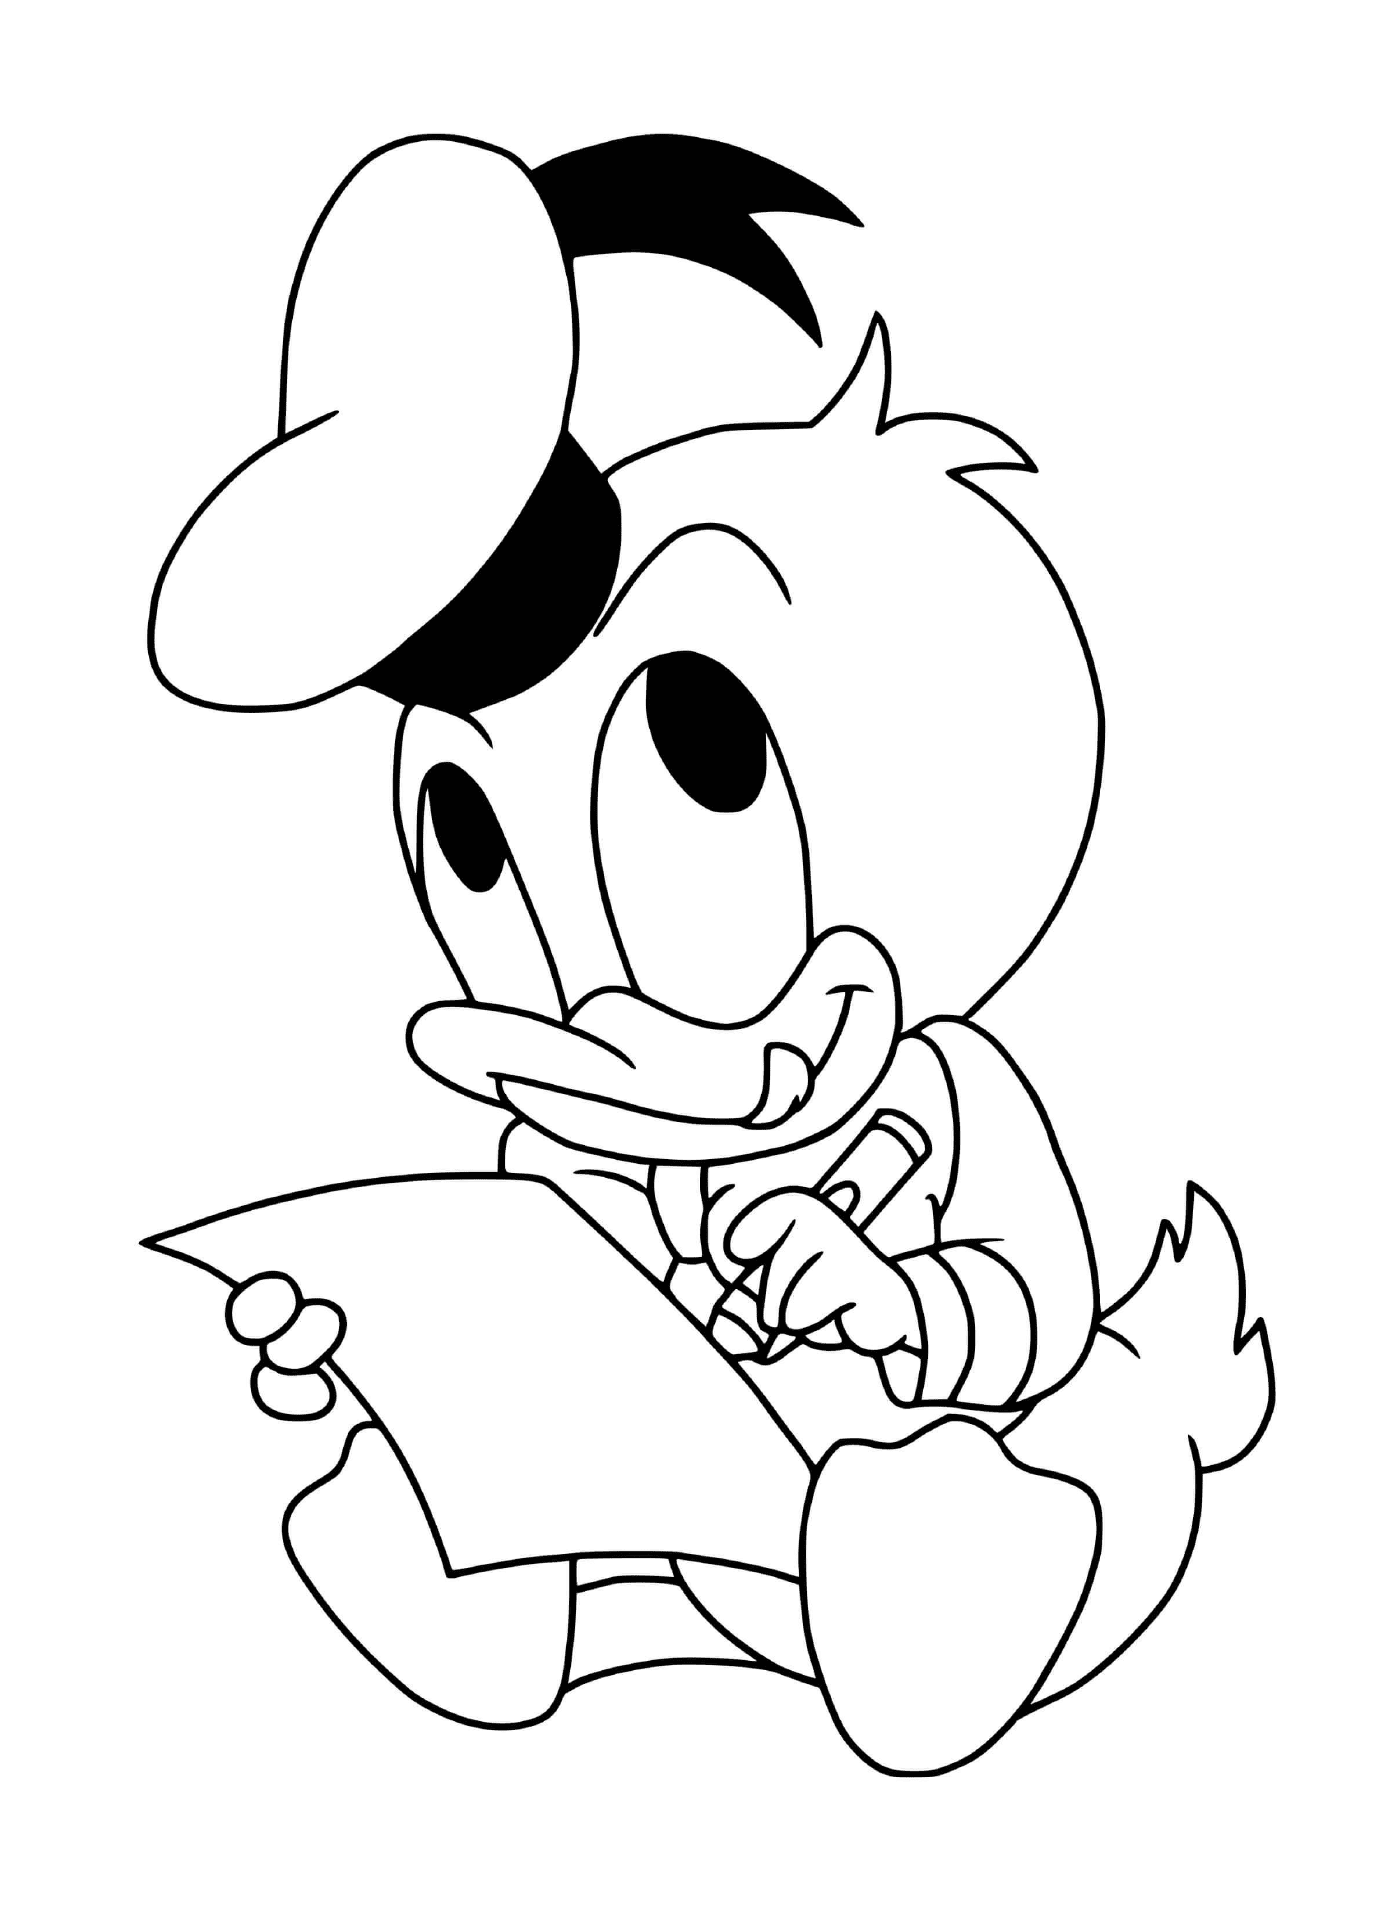  Donald Duck baby writes a letter 